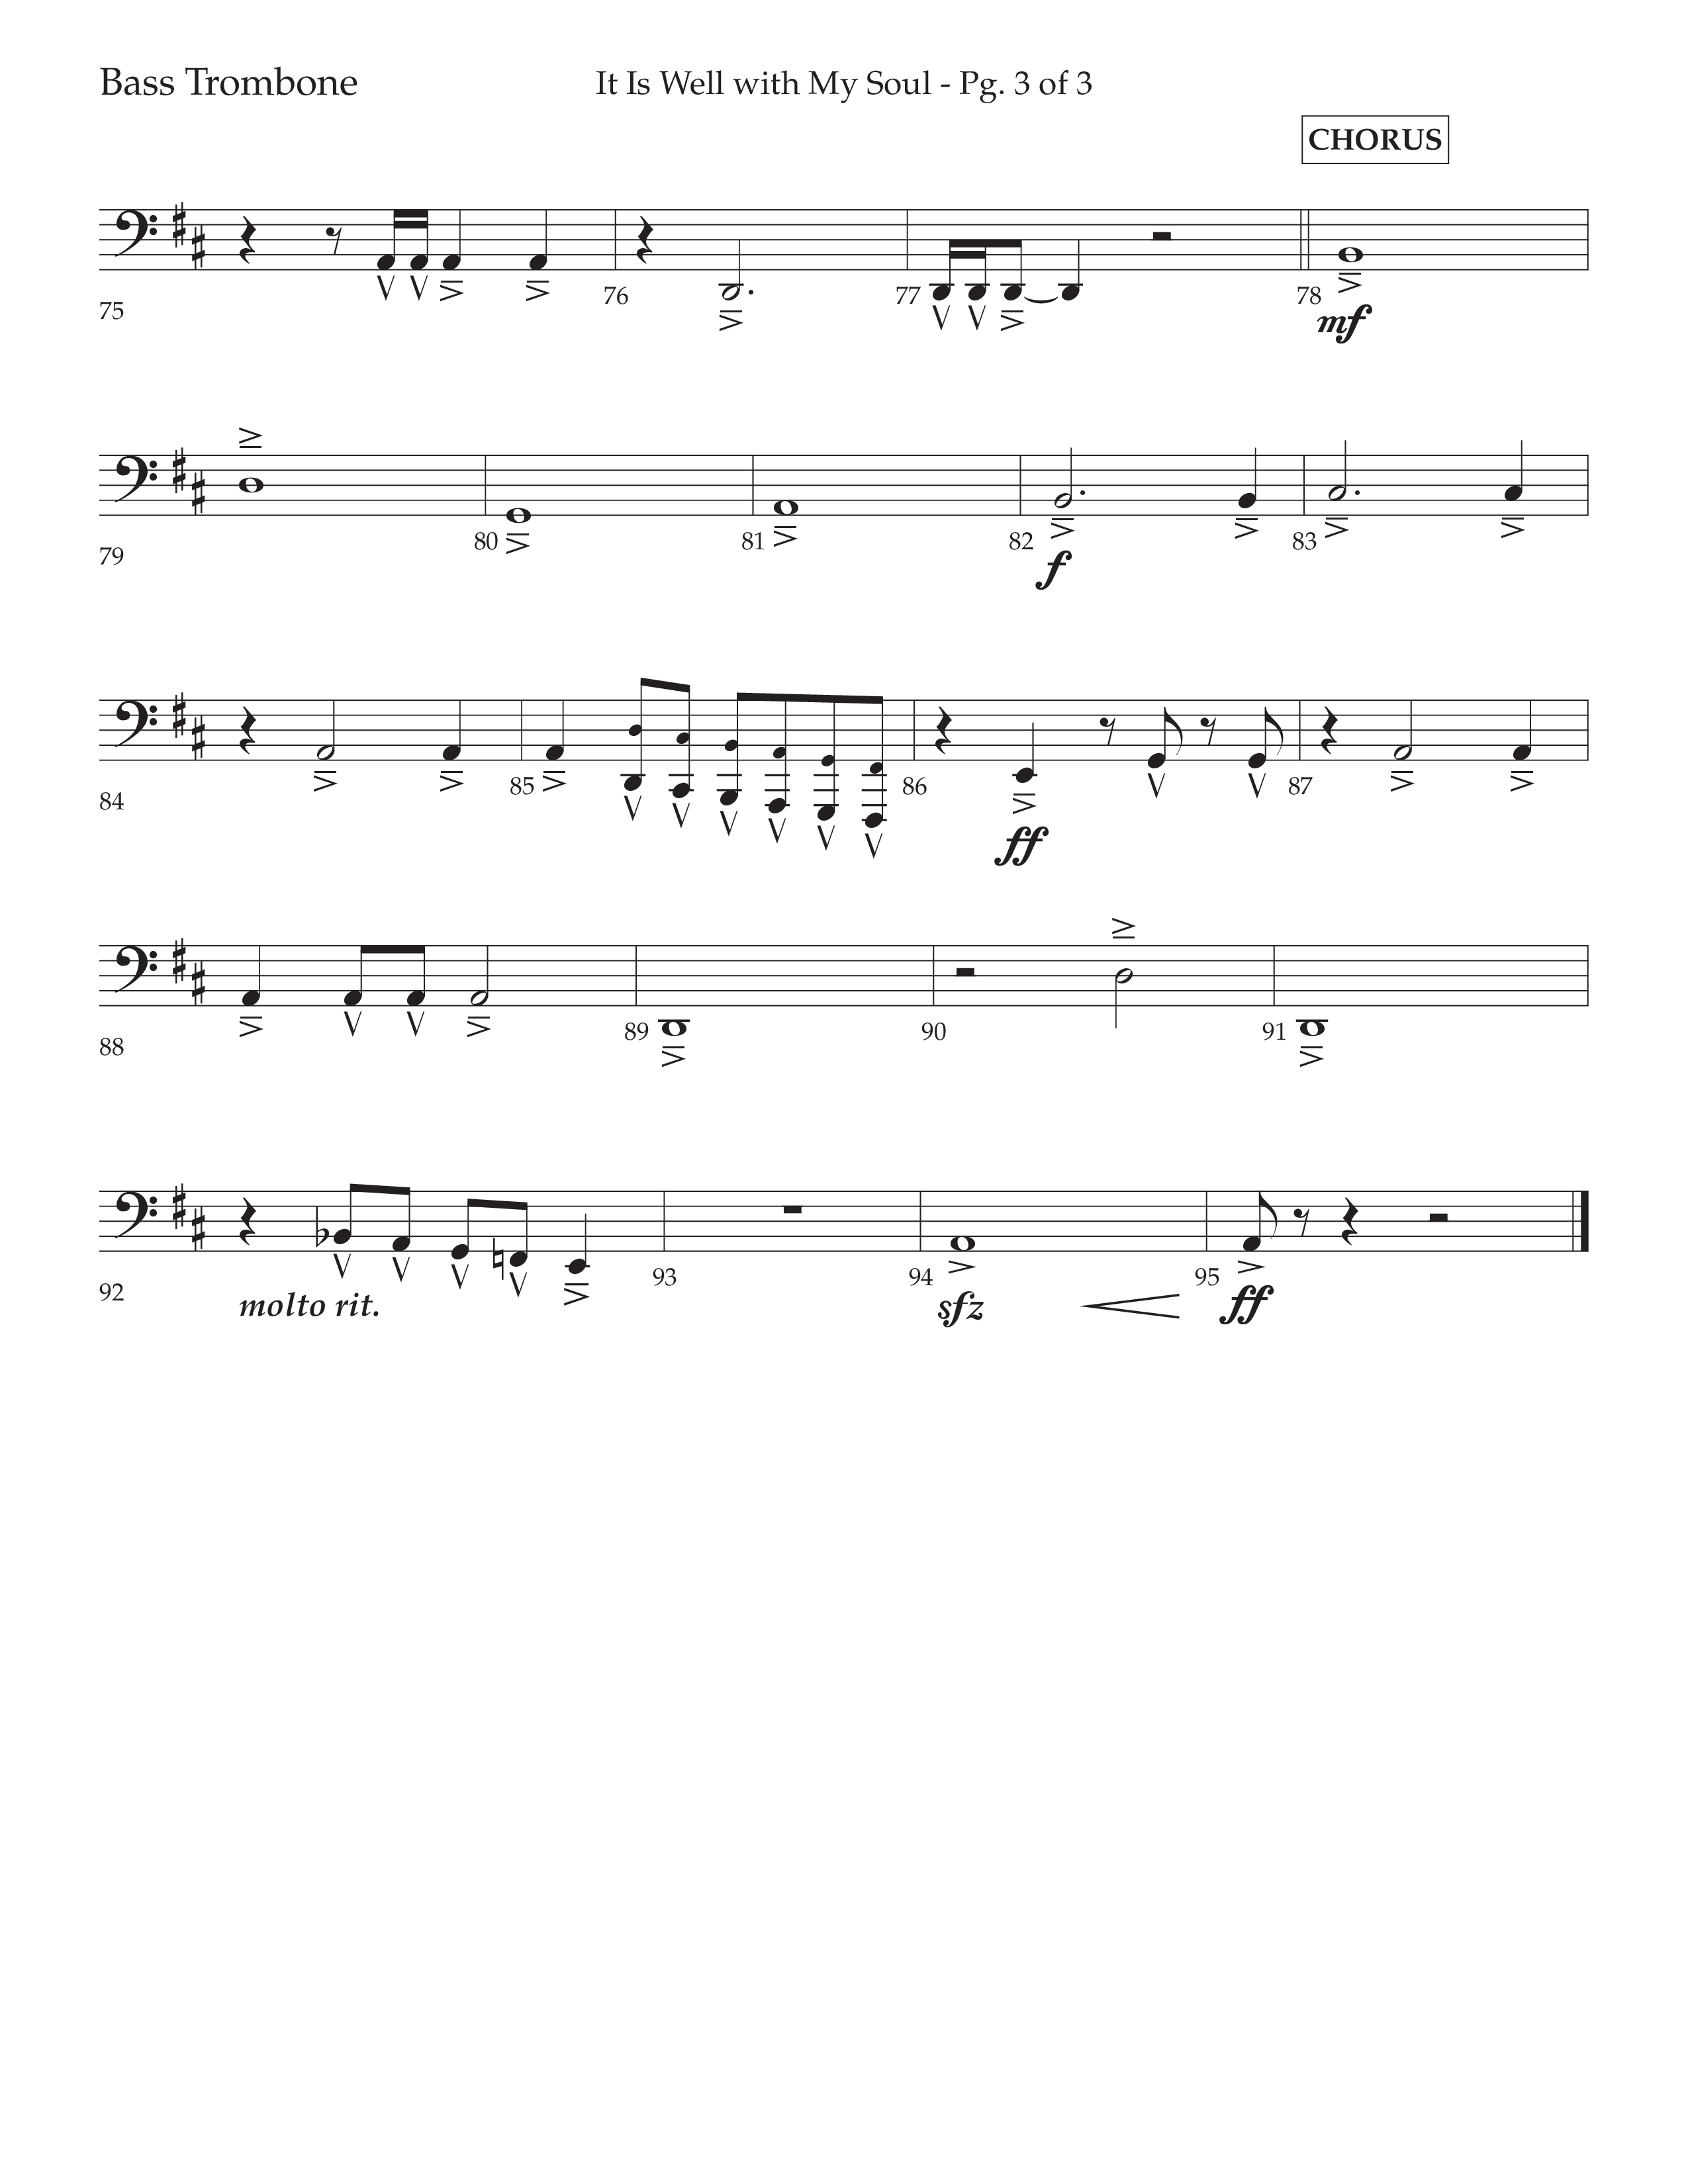 It Is Well With My Soul (Choral Anthem SATB) Bass Trombone (Lifeway Choral / Arr. John Bolin / Orch. David Clydesdale)